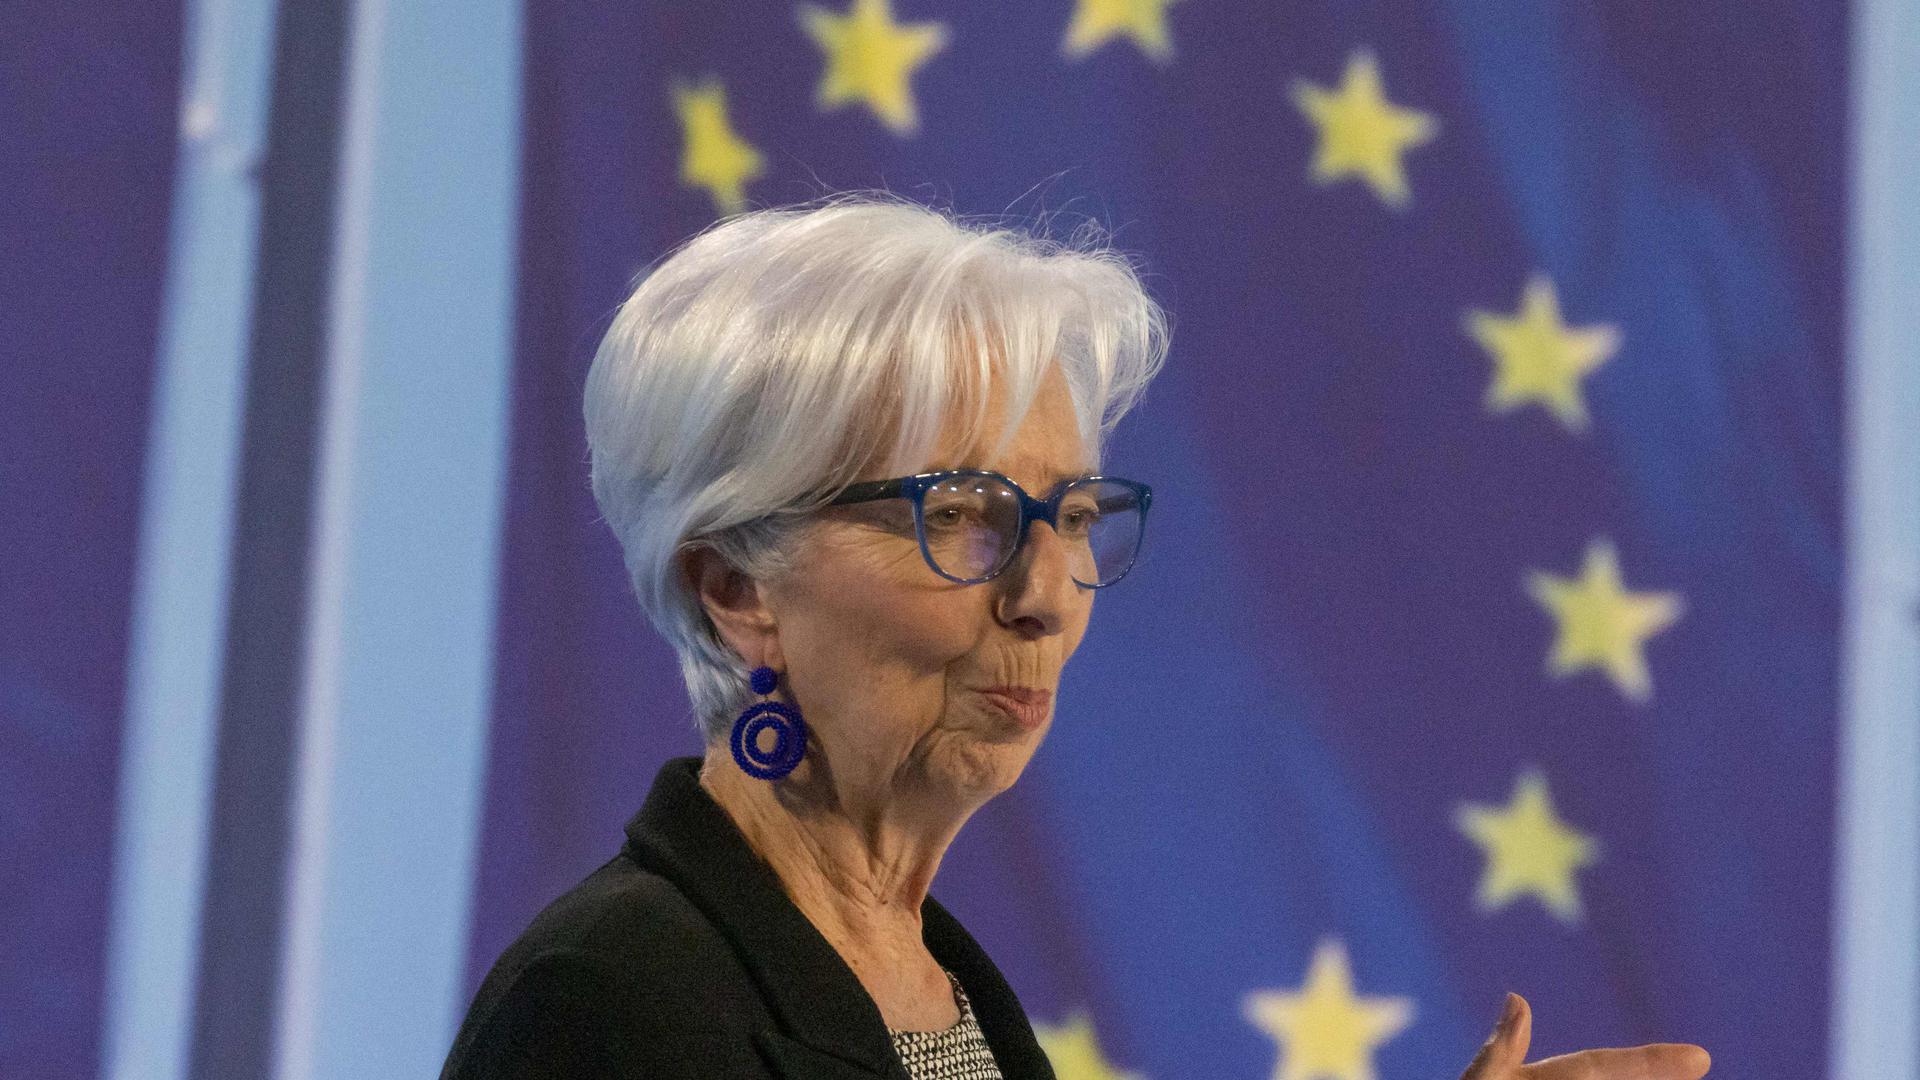 European Central Bank (ECB) President Christine Lagarde addresses a press conference on the eurozone's monetary policy in Frankfurt am Main, western Germany on May 4, 2023. (Photo by ANDRE PAIN / AFP)